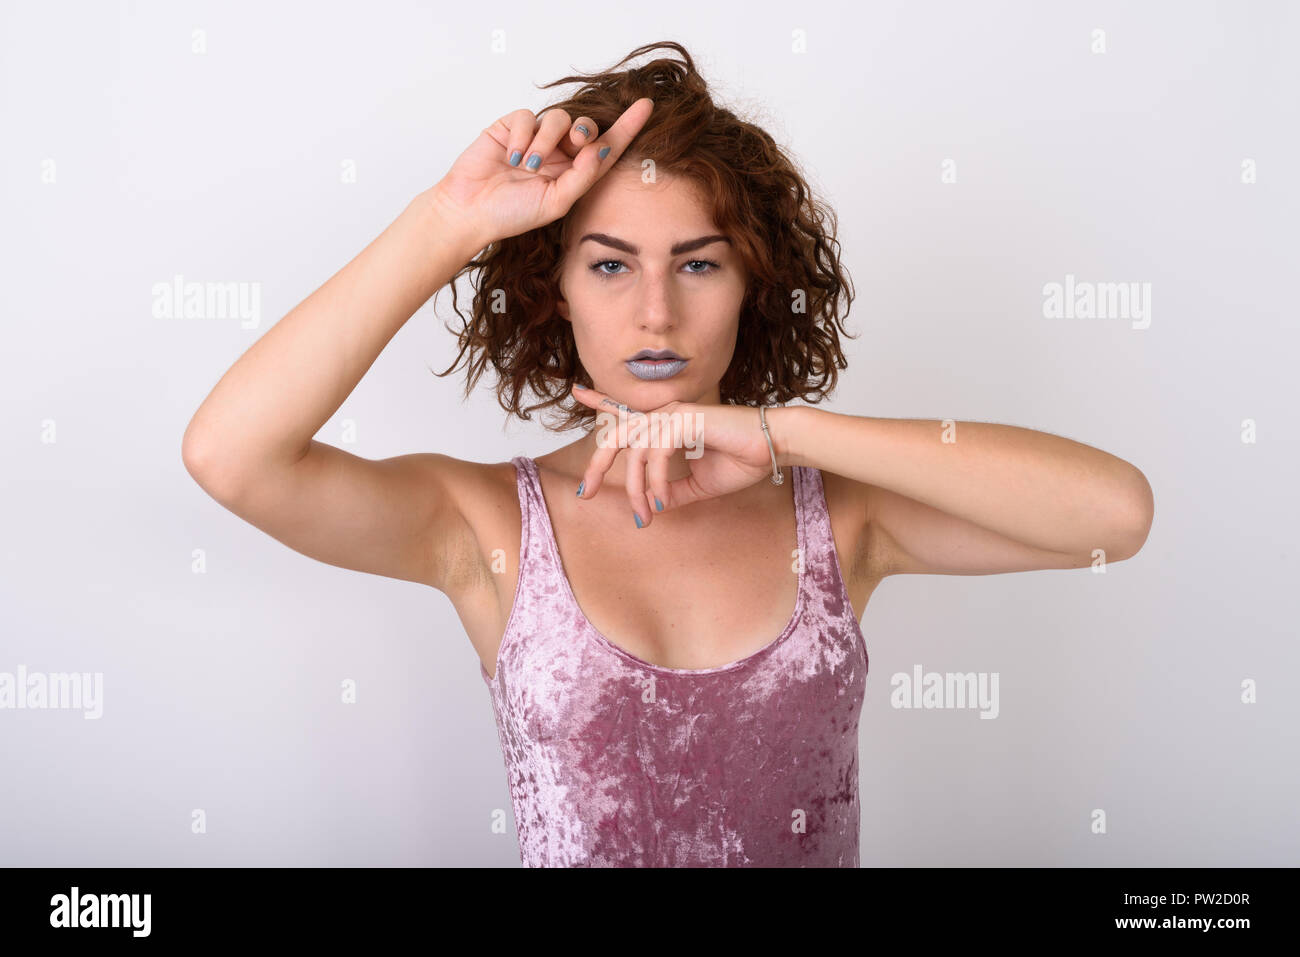 Portrait of Young Woman Against White Background Banque D'Images